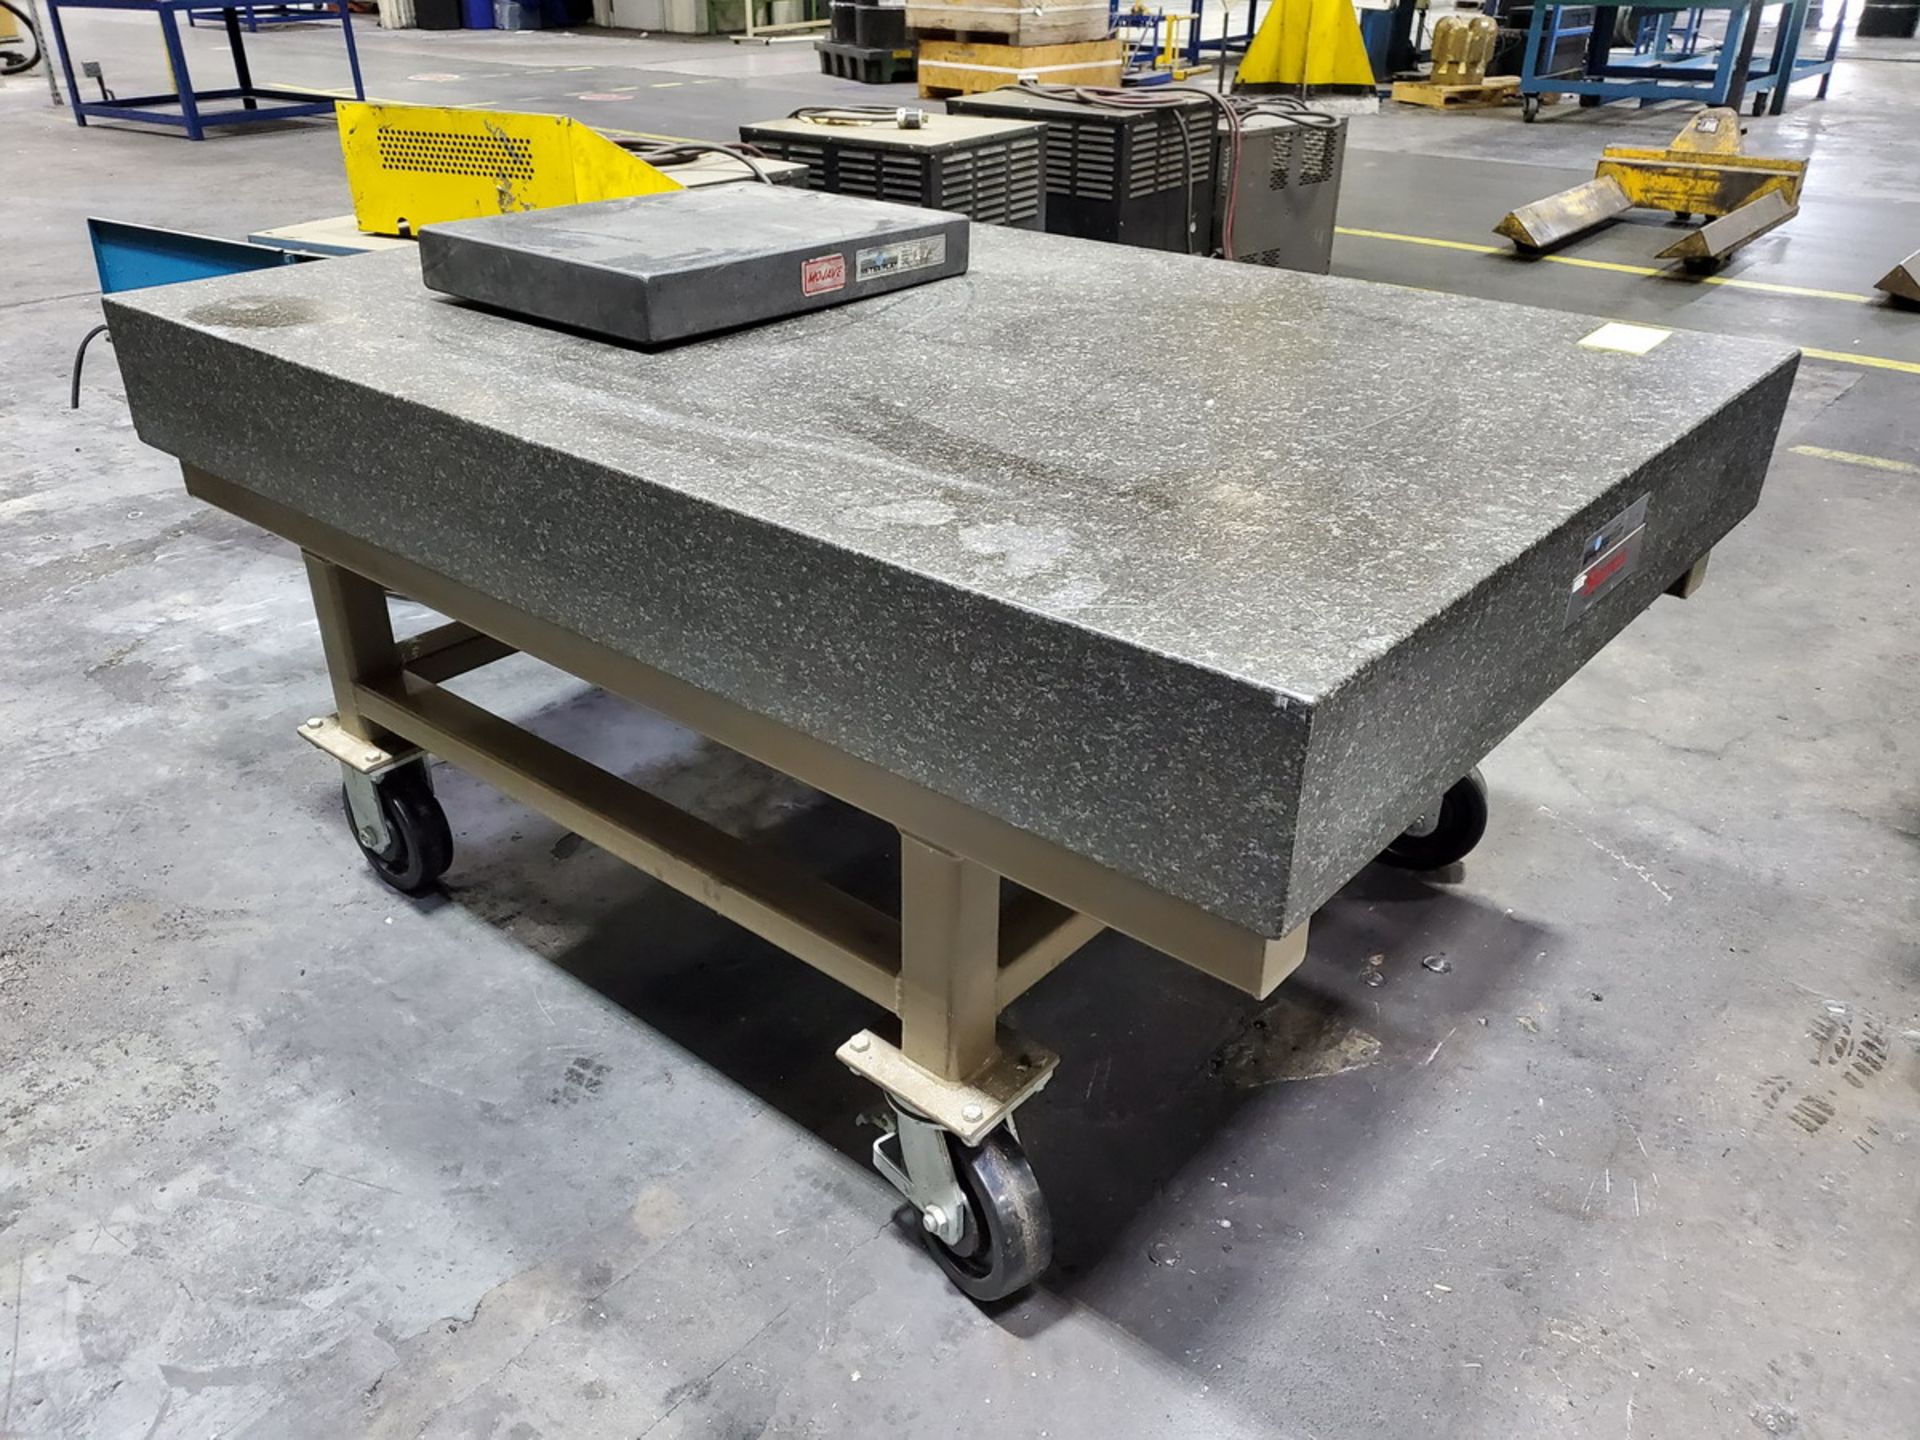 Starrett Granite Surface Plate 6' x 4' x 8", W/ Rolling Cart (Smaller Surface Plate Excluded) - Image 3 of 4